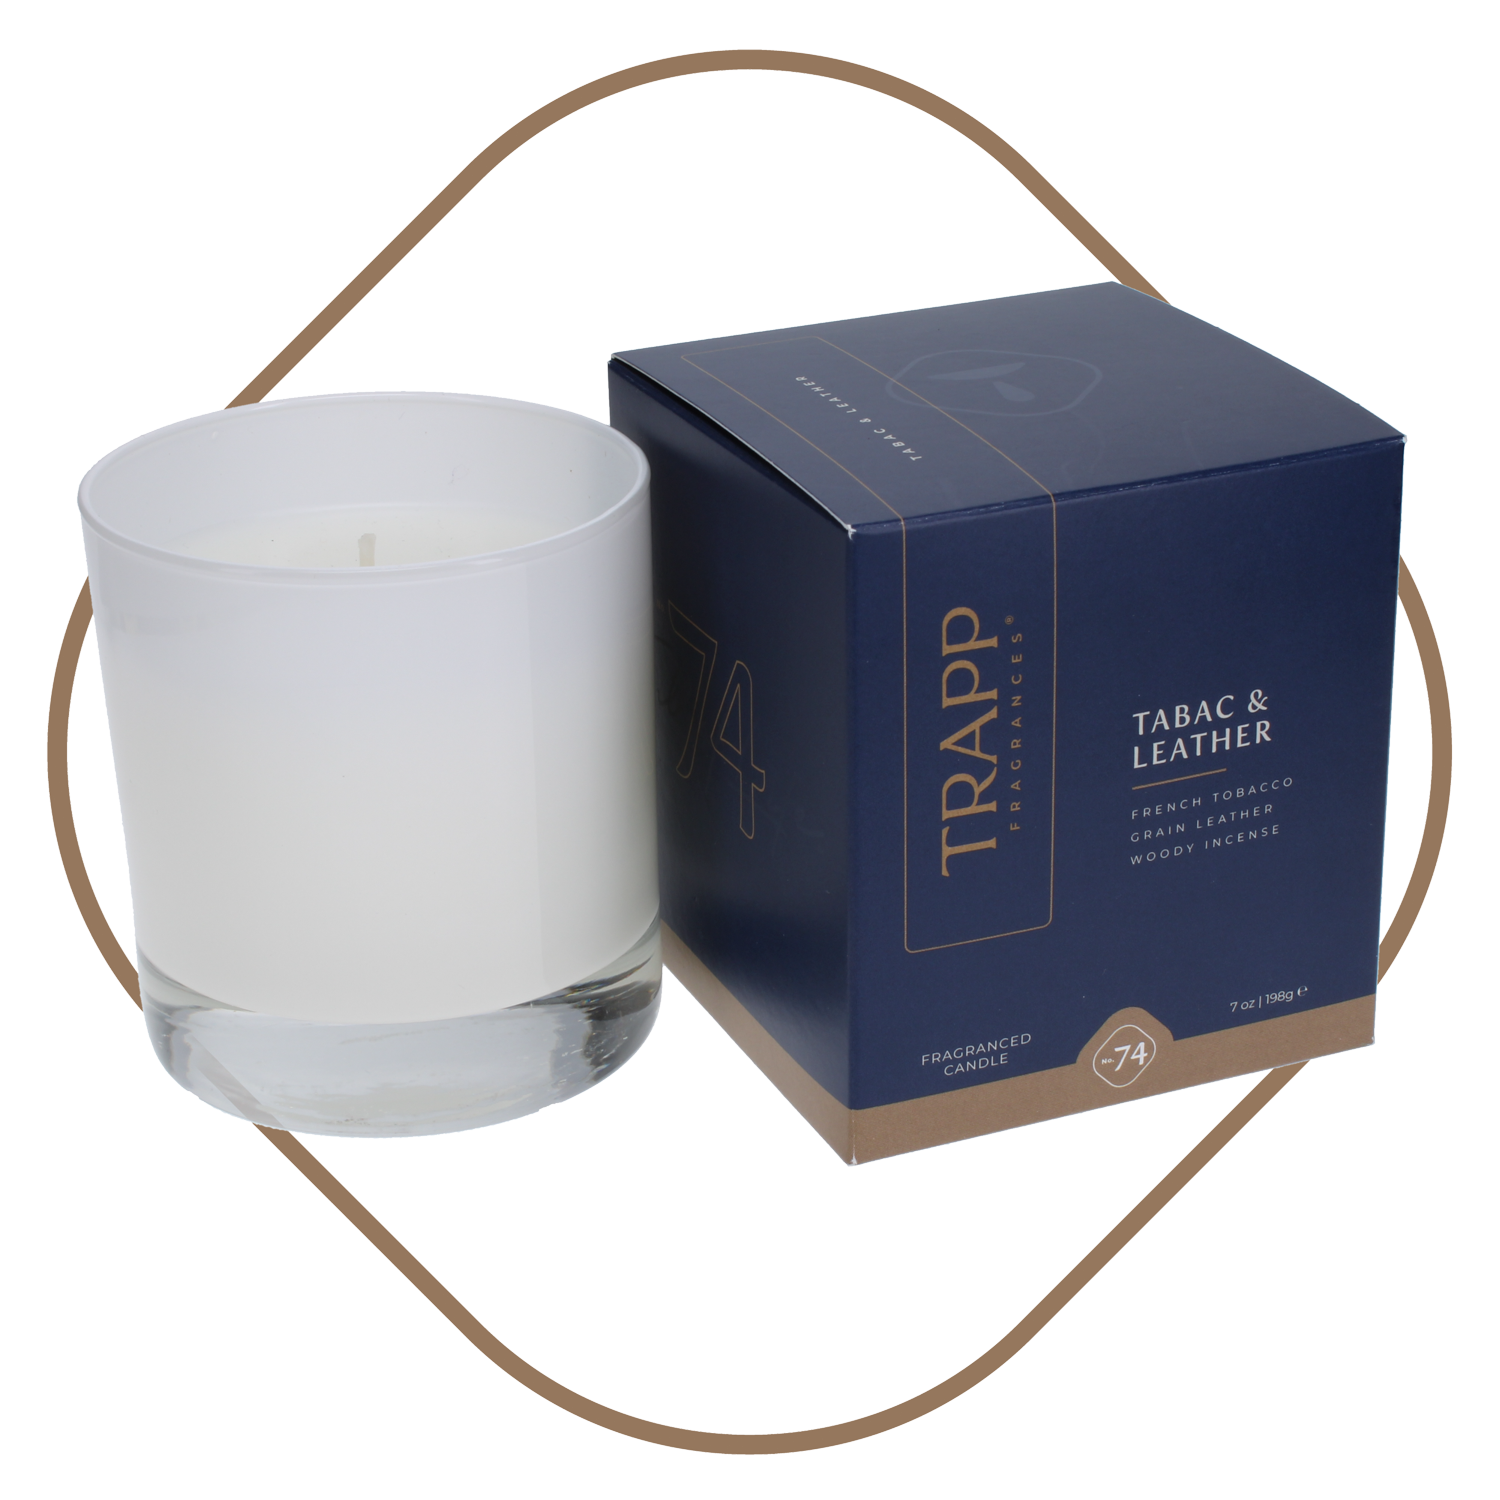 No. 74 Tabac & Leather 7 oz. Candle in Signature Box